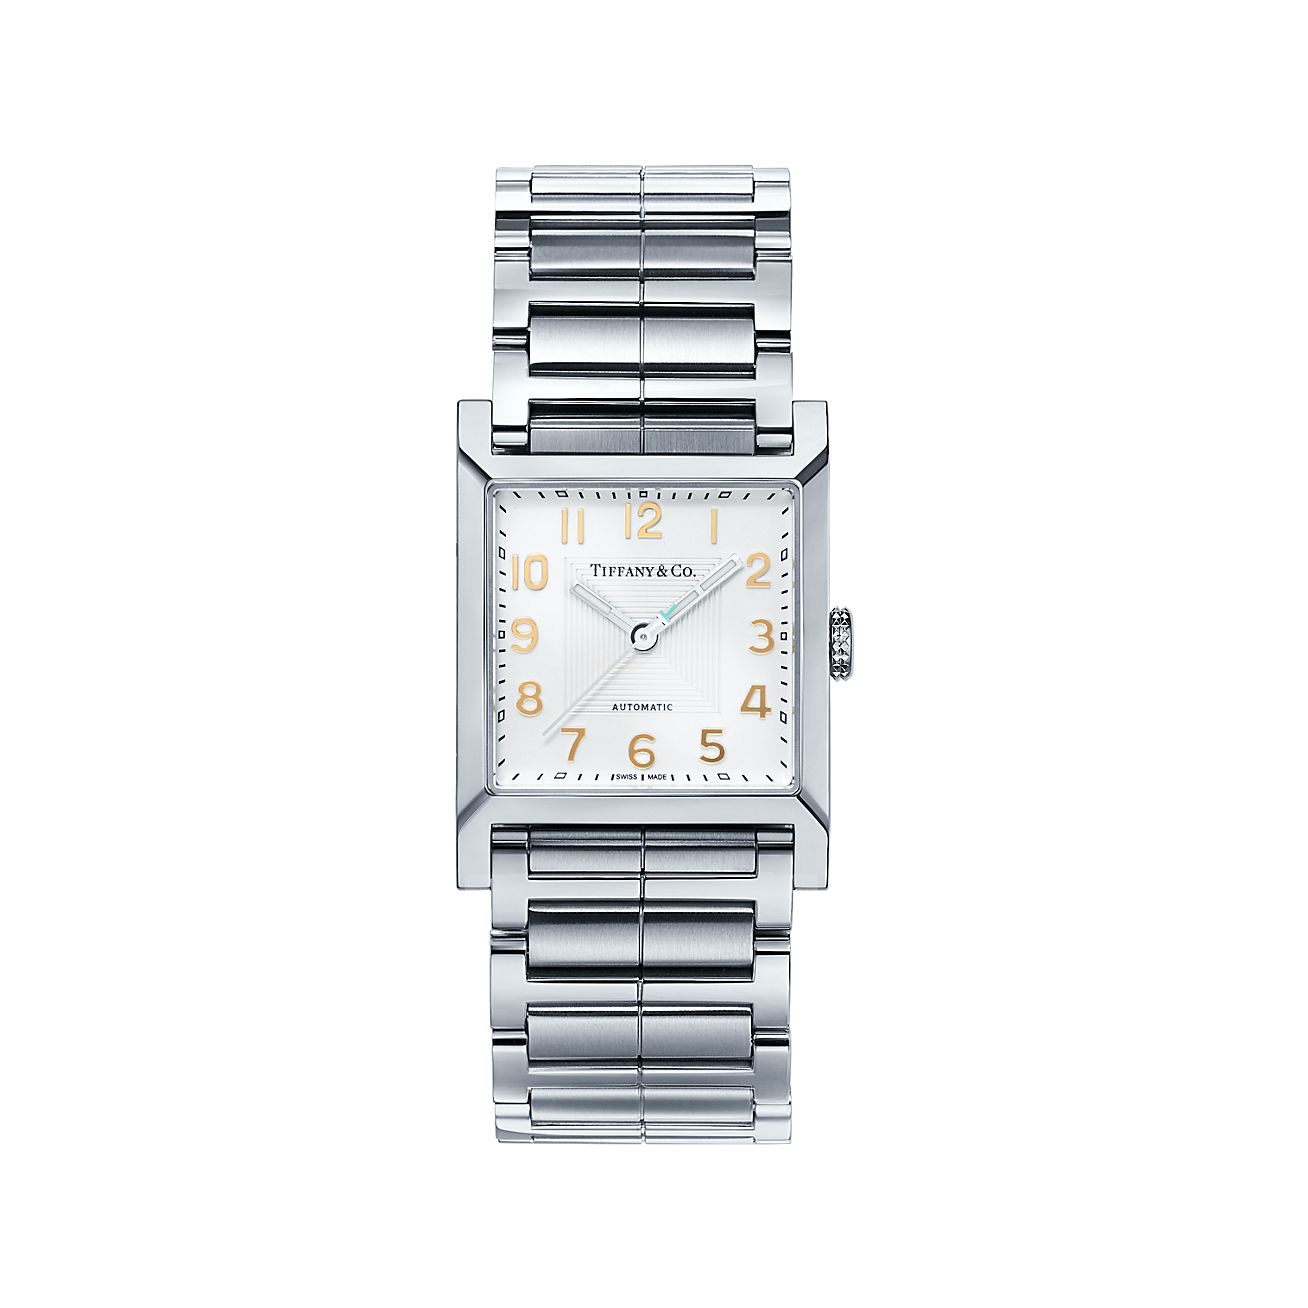 Tiffany 1837 Makers 27 mm square watch in stainless steel with a white dial. | Tiffany & Co.